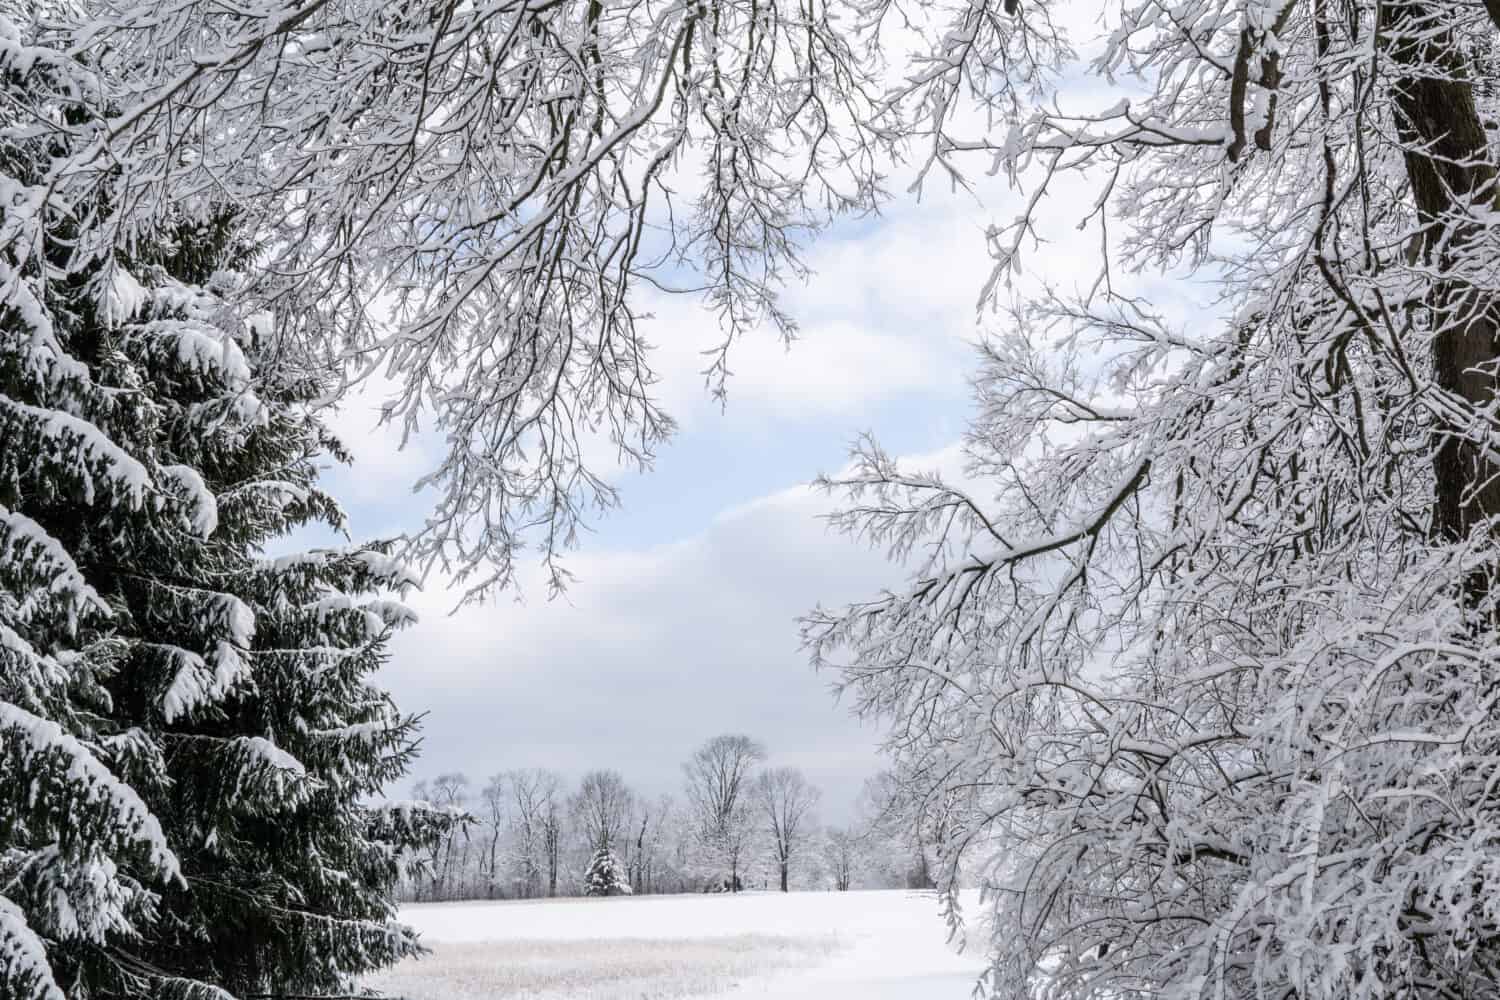 Walk in the park after a winter storm, photos of winter landscape in the Wyomissing Park, Berks County, Pennsylvania